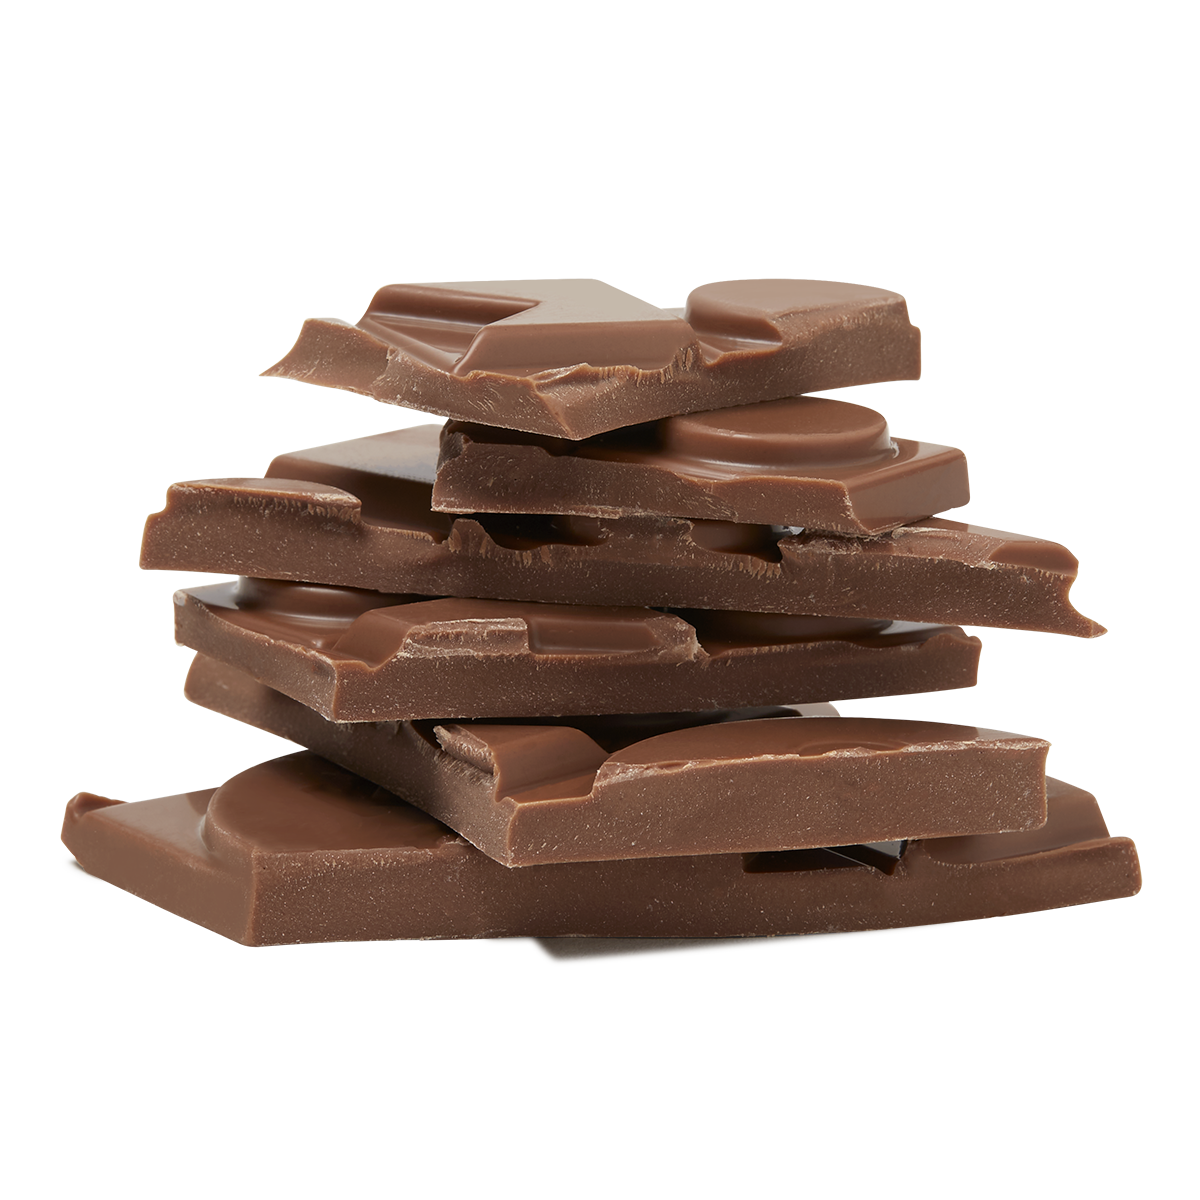 Broken chocolate pieces stacked together